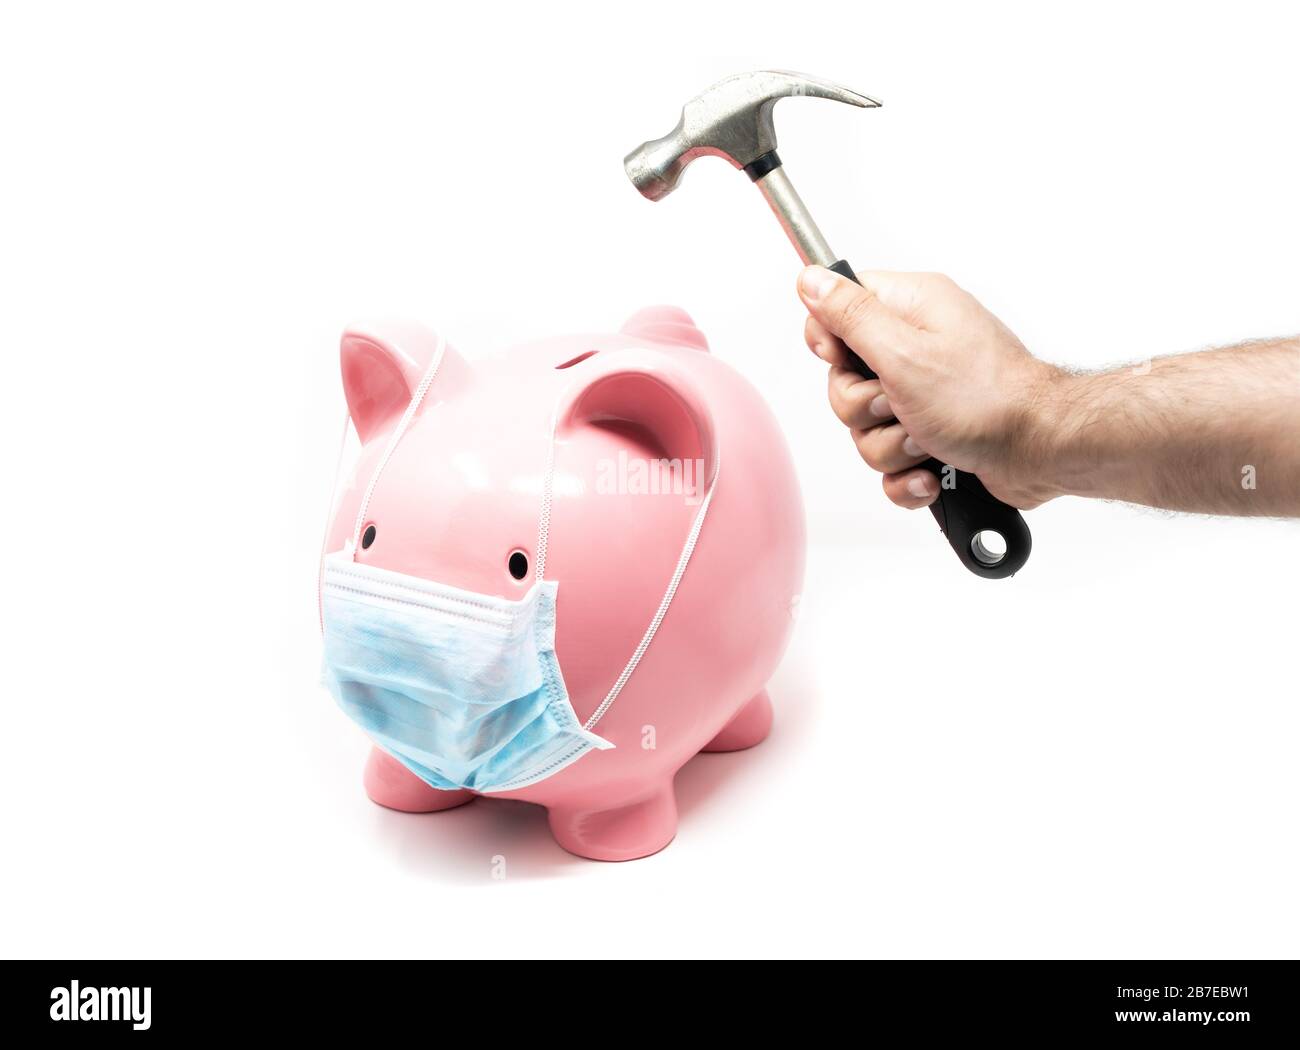 Piggybank wearing surgery mask and hand with hummer ready to crash it. Concept of the impact of a pandemia in world Economy Stock Photo